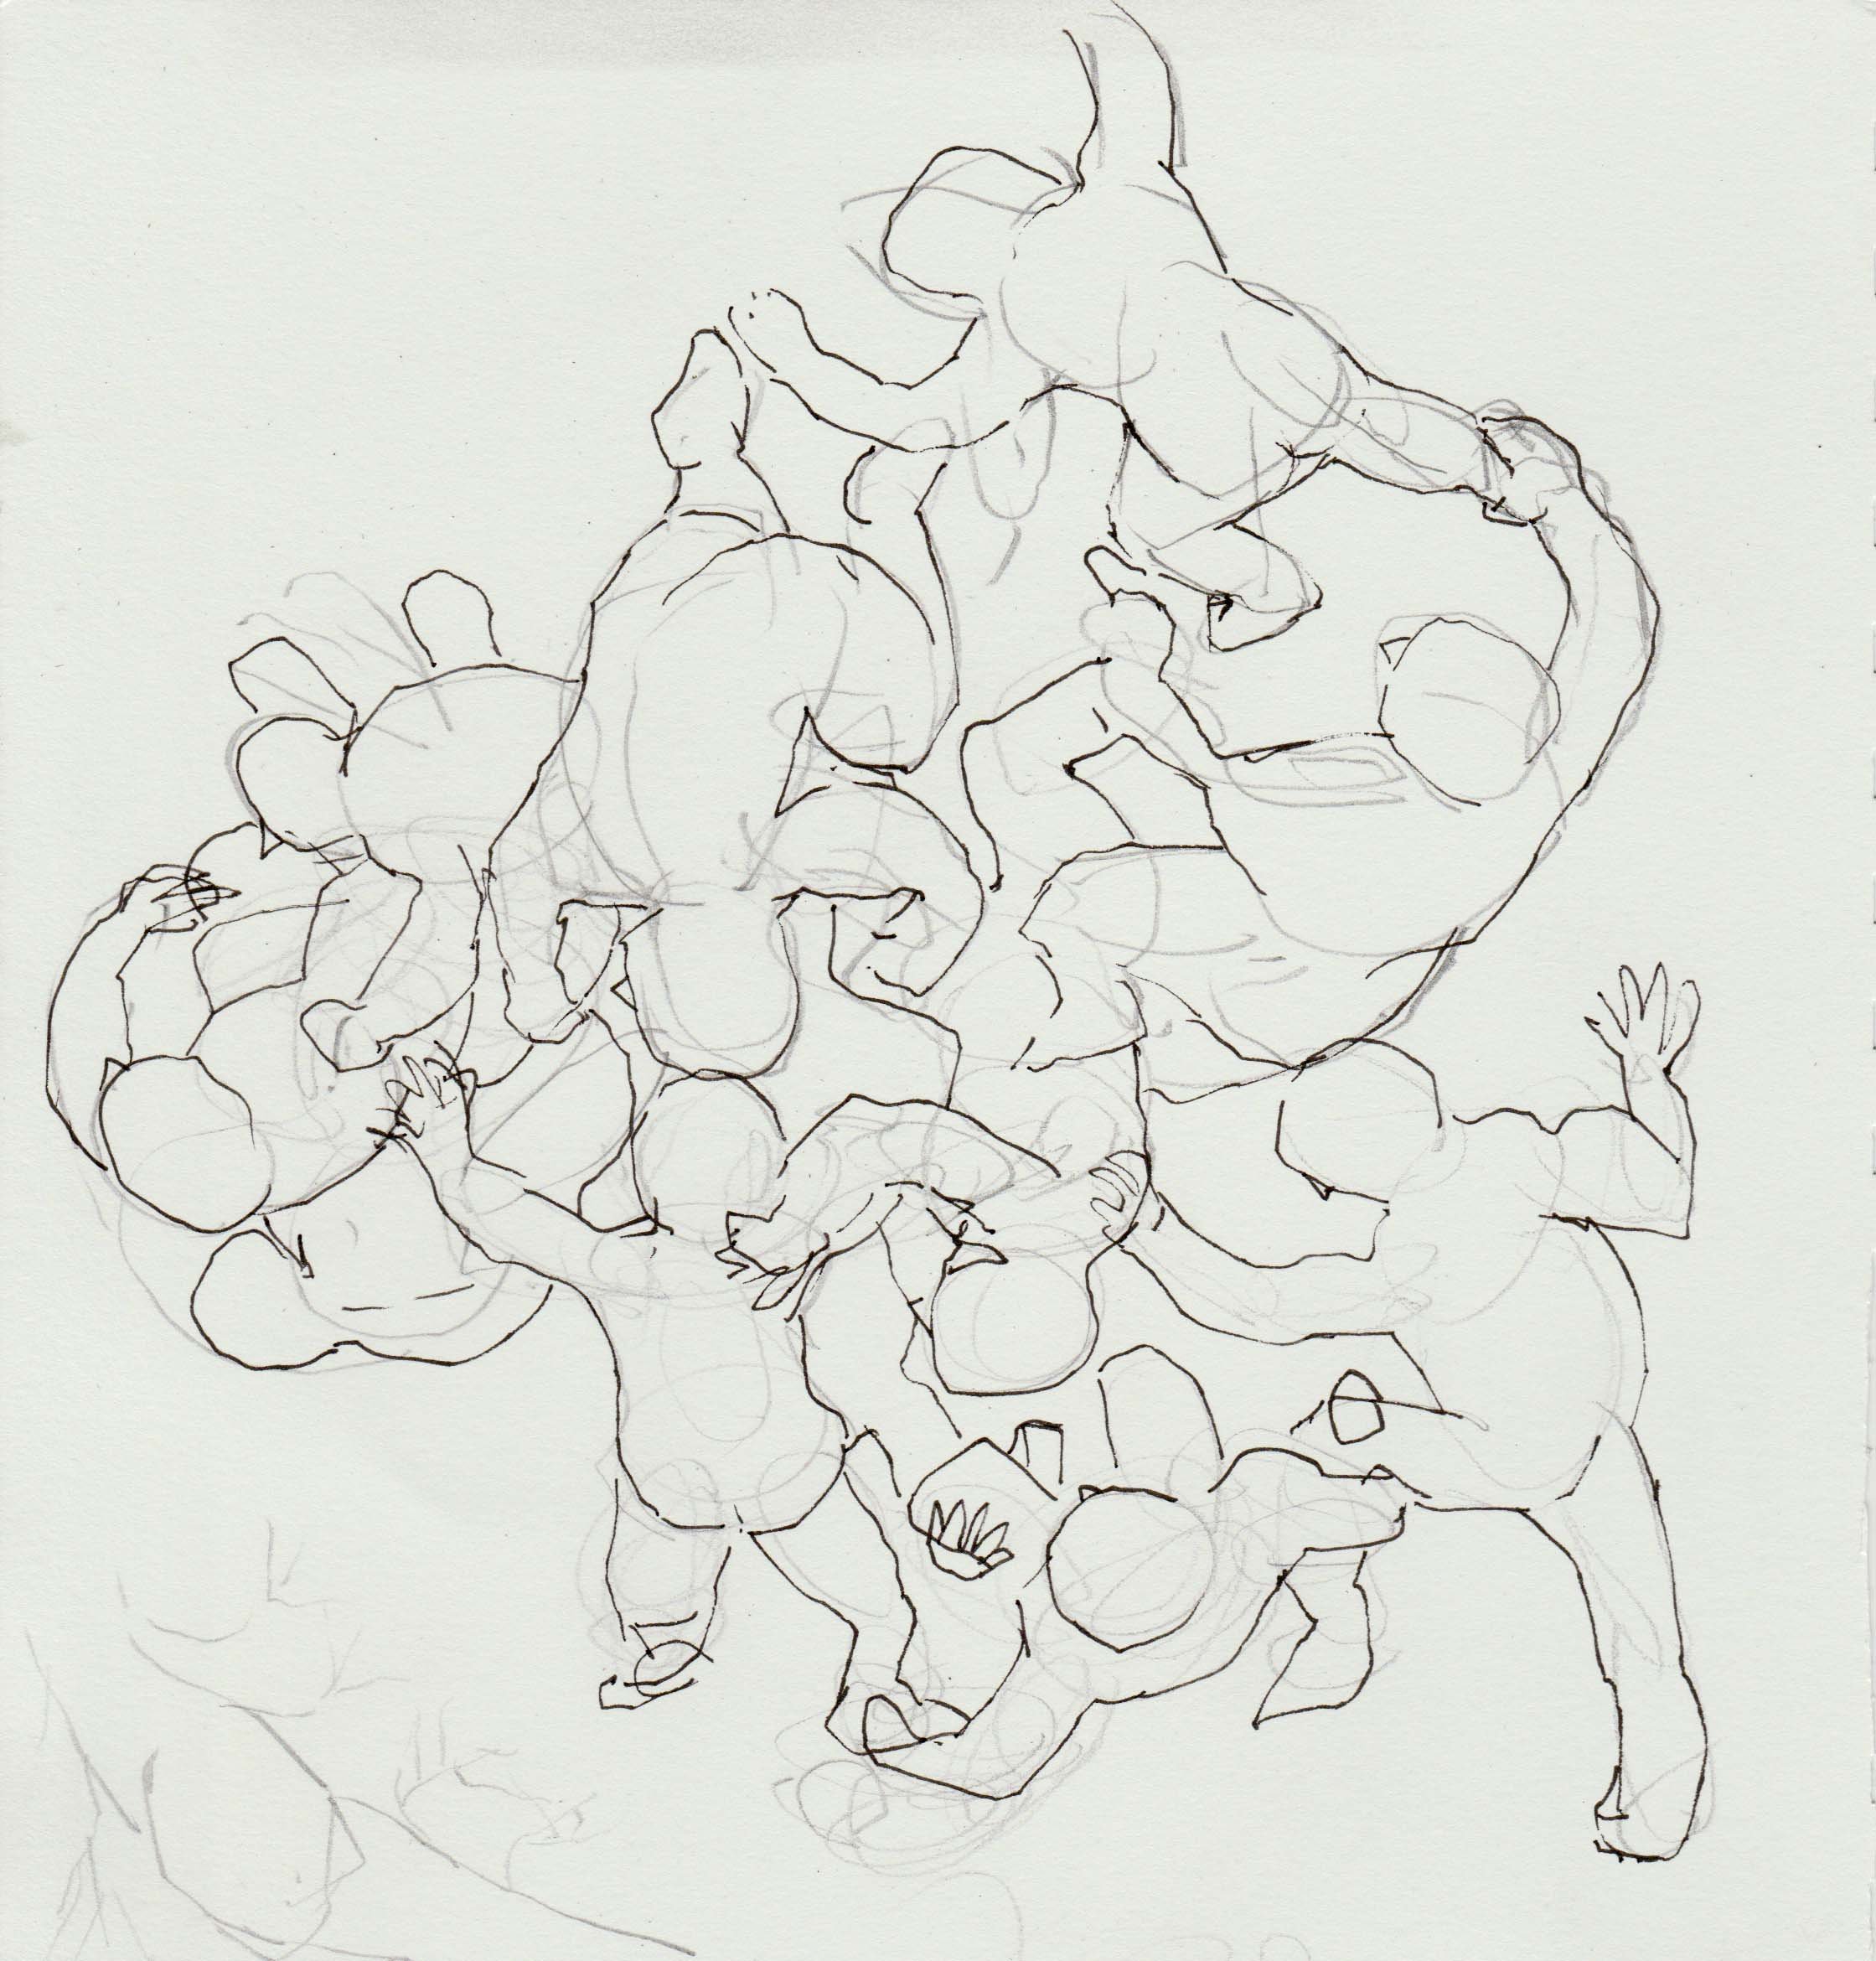 Initial sketch ideas: a tangle of giants